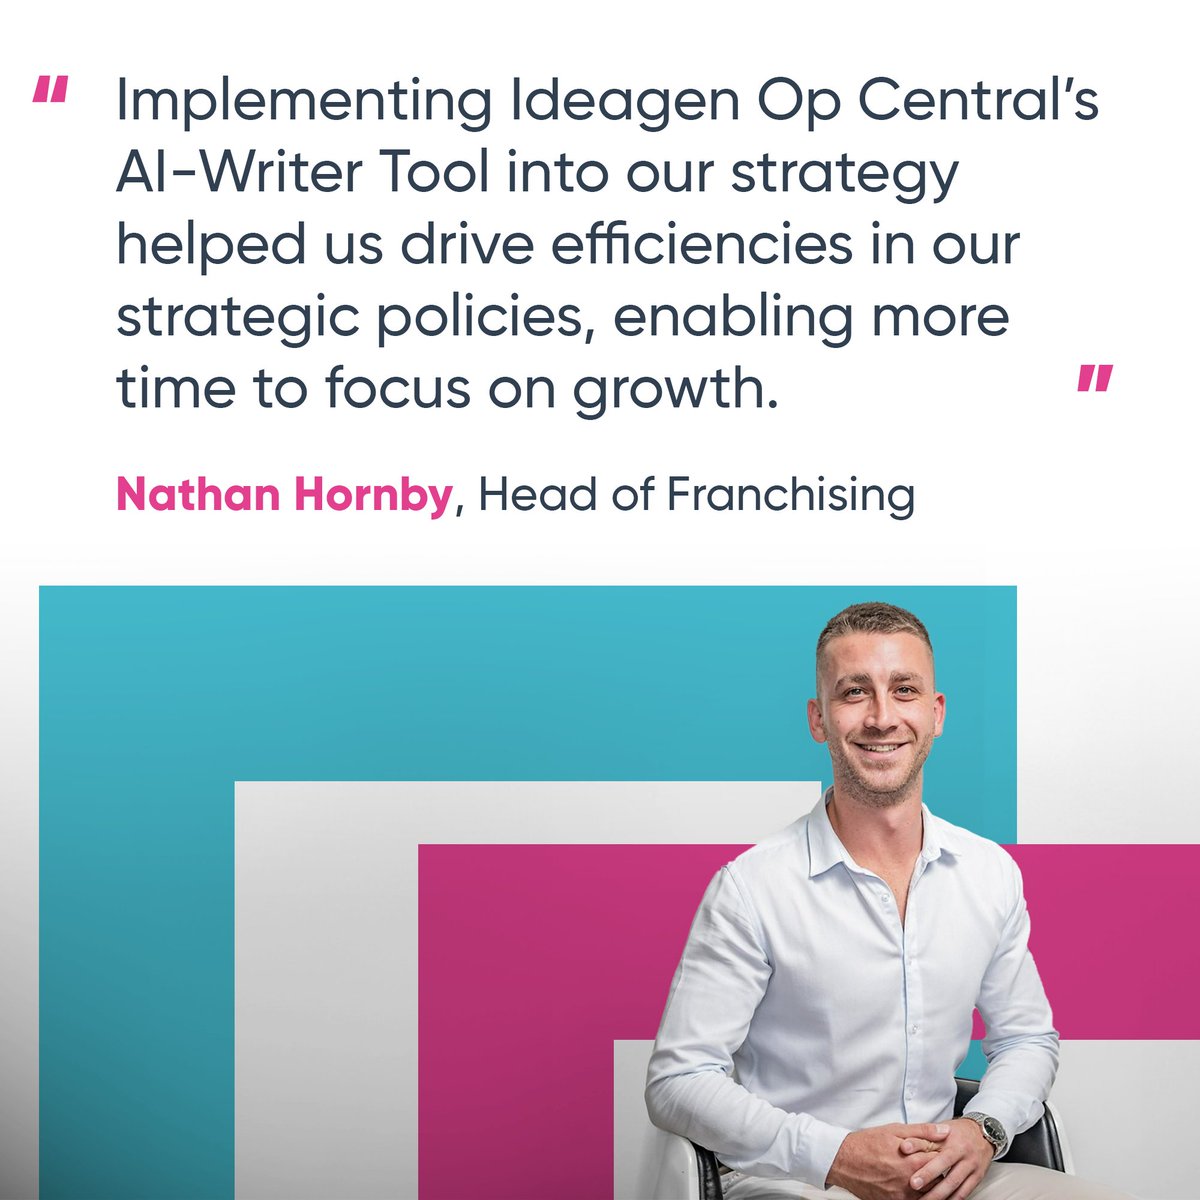 👨‍🔧 From 3 best mates to a nationally recognised company of over 150 employees, Plumbing Bros. have leveraged Ideagen Op Central's AI-Powered tools to support growth throughout their journey. Read more in our latest blog: bit.ly/3JqKtFE